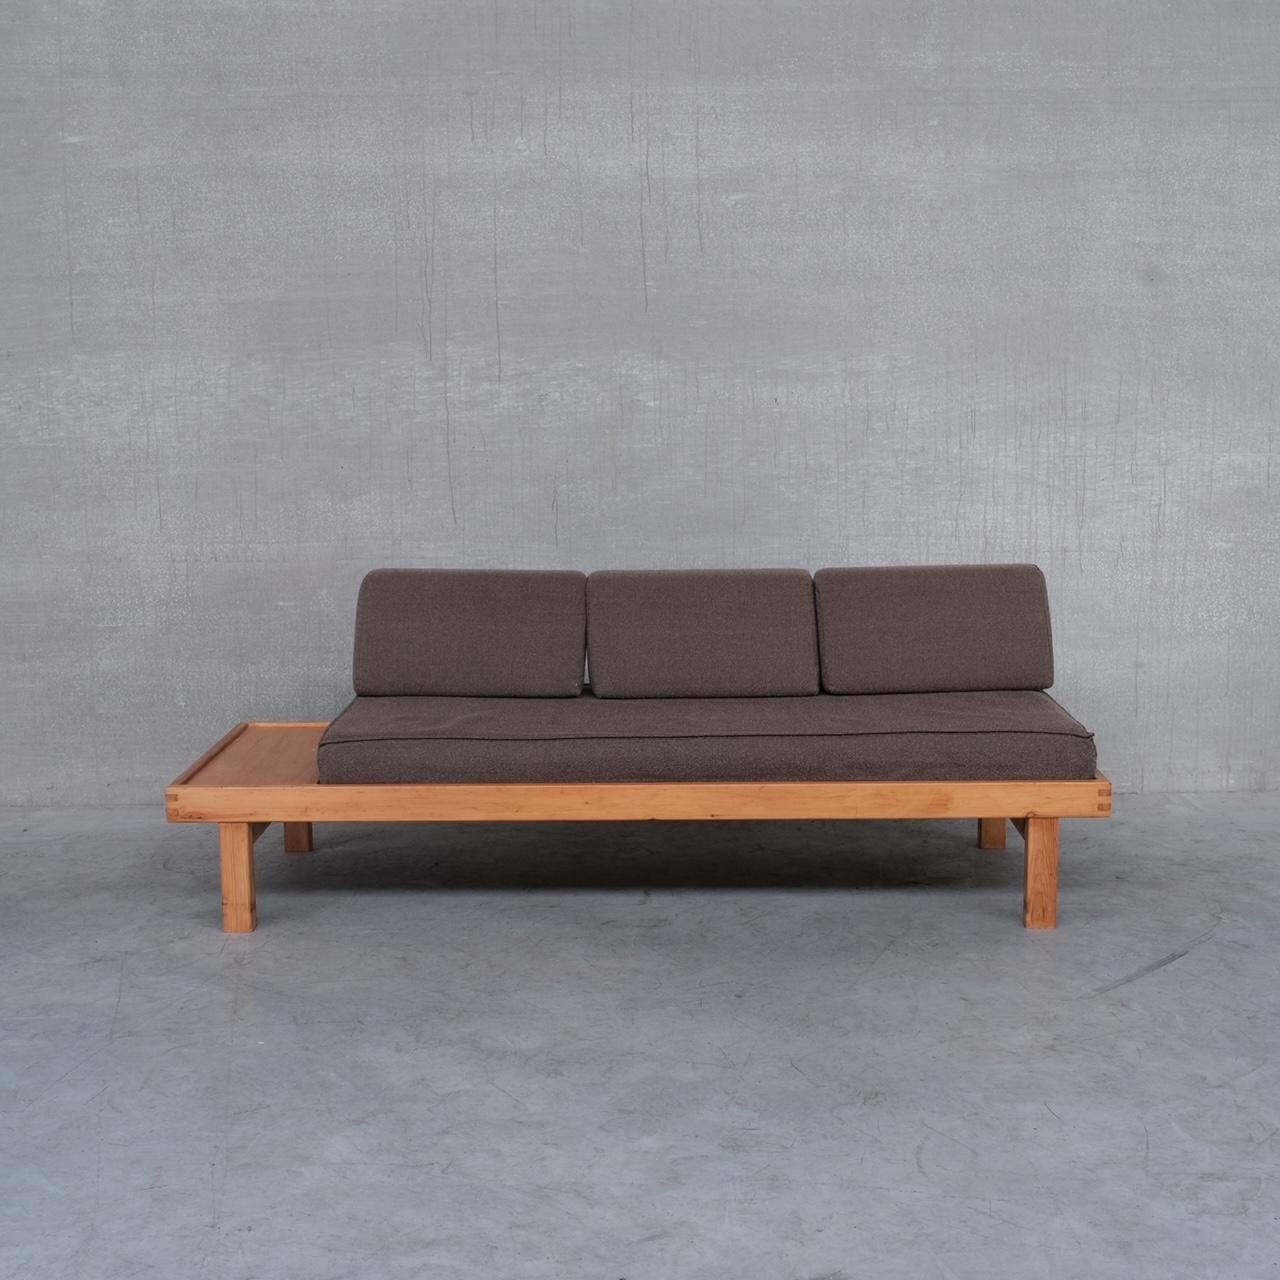 A pine mid-century day bed attributed to Christian Durupt for Meribel Ski station. 

France, c1960s. 

Upholstery looks to be original, it remains in good condition but could easily be updated. 

Good condition, some scuffs and wear